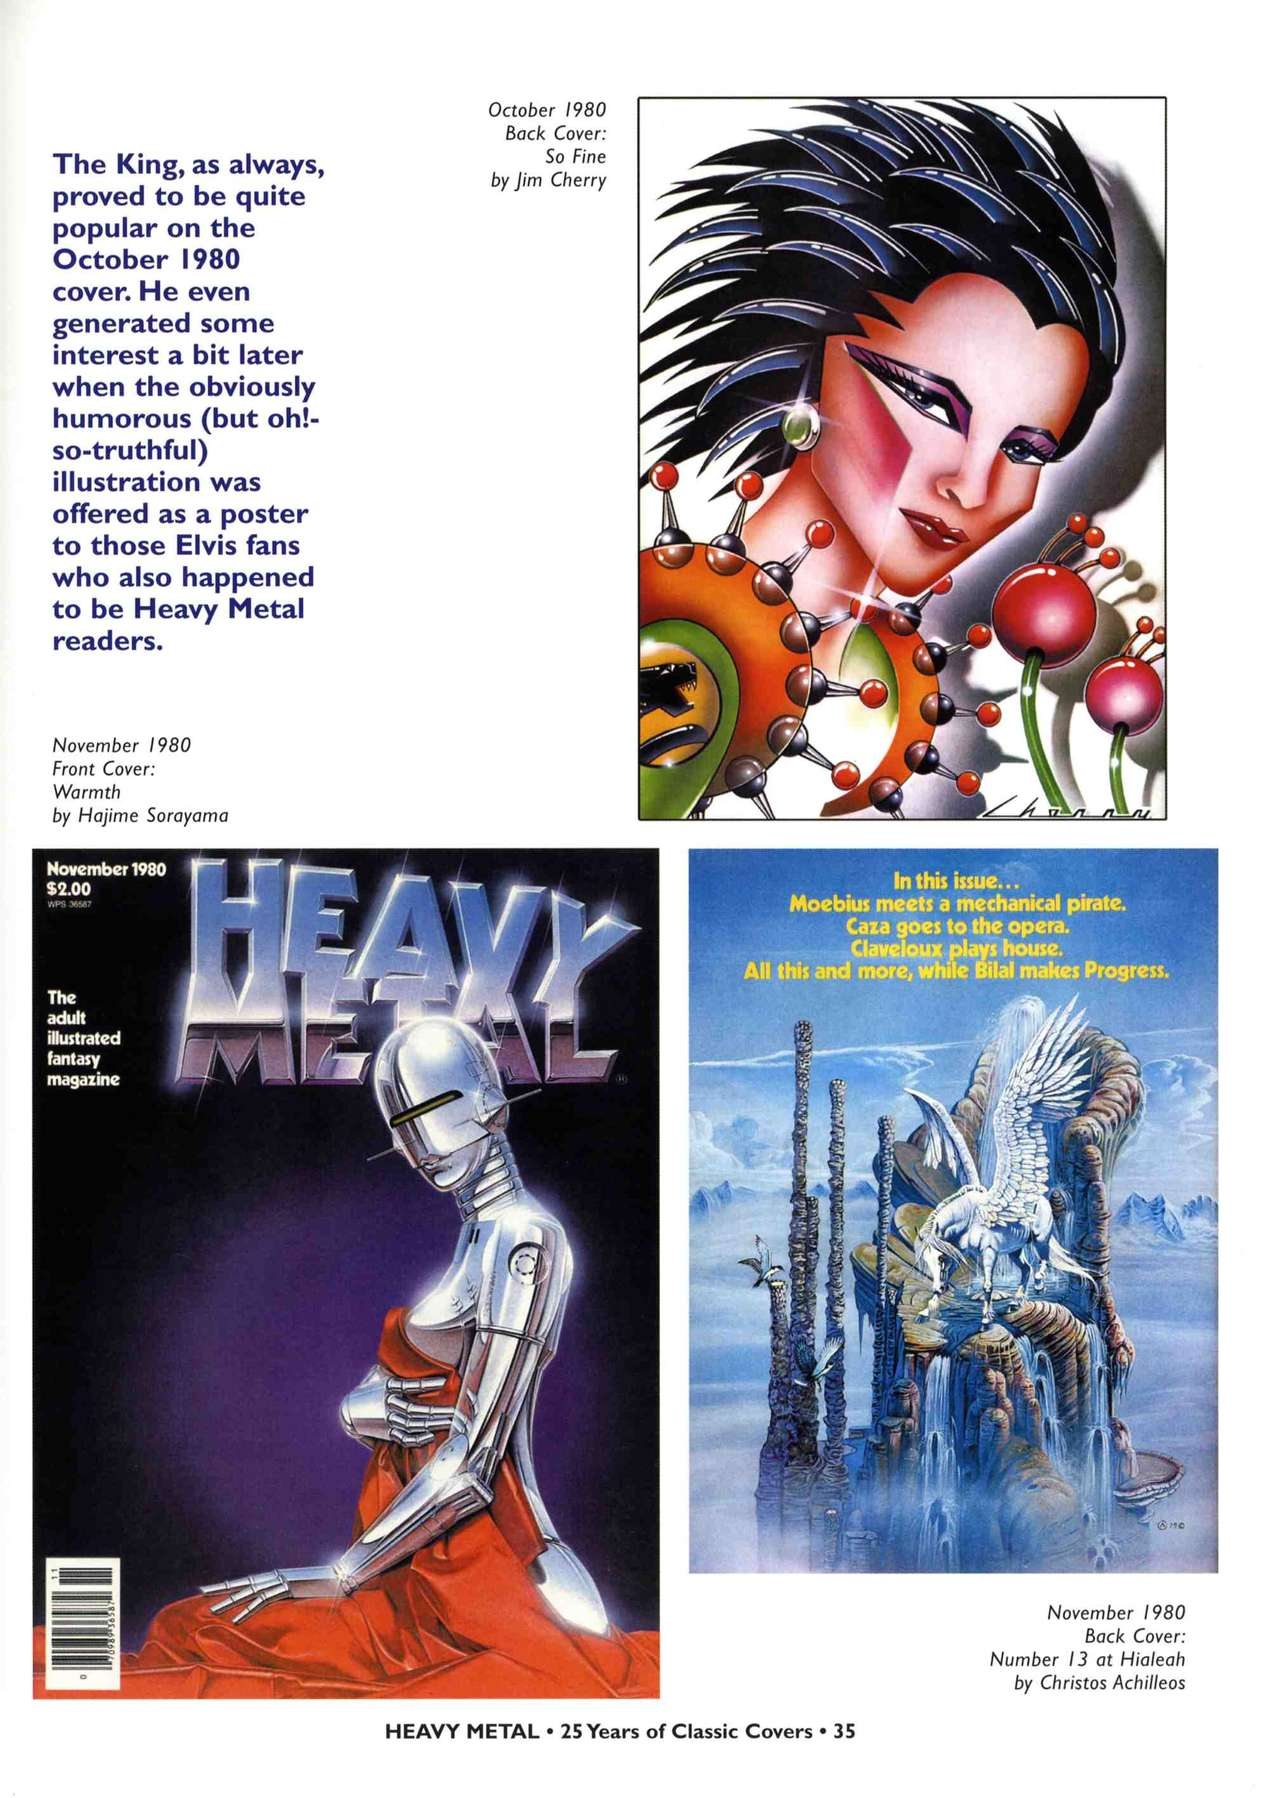 HEAVY METAL 25 Years of Classic Covers 40